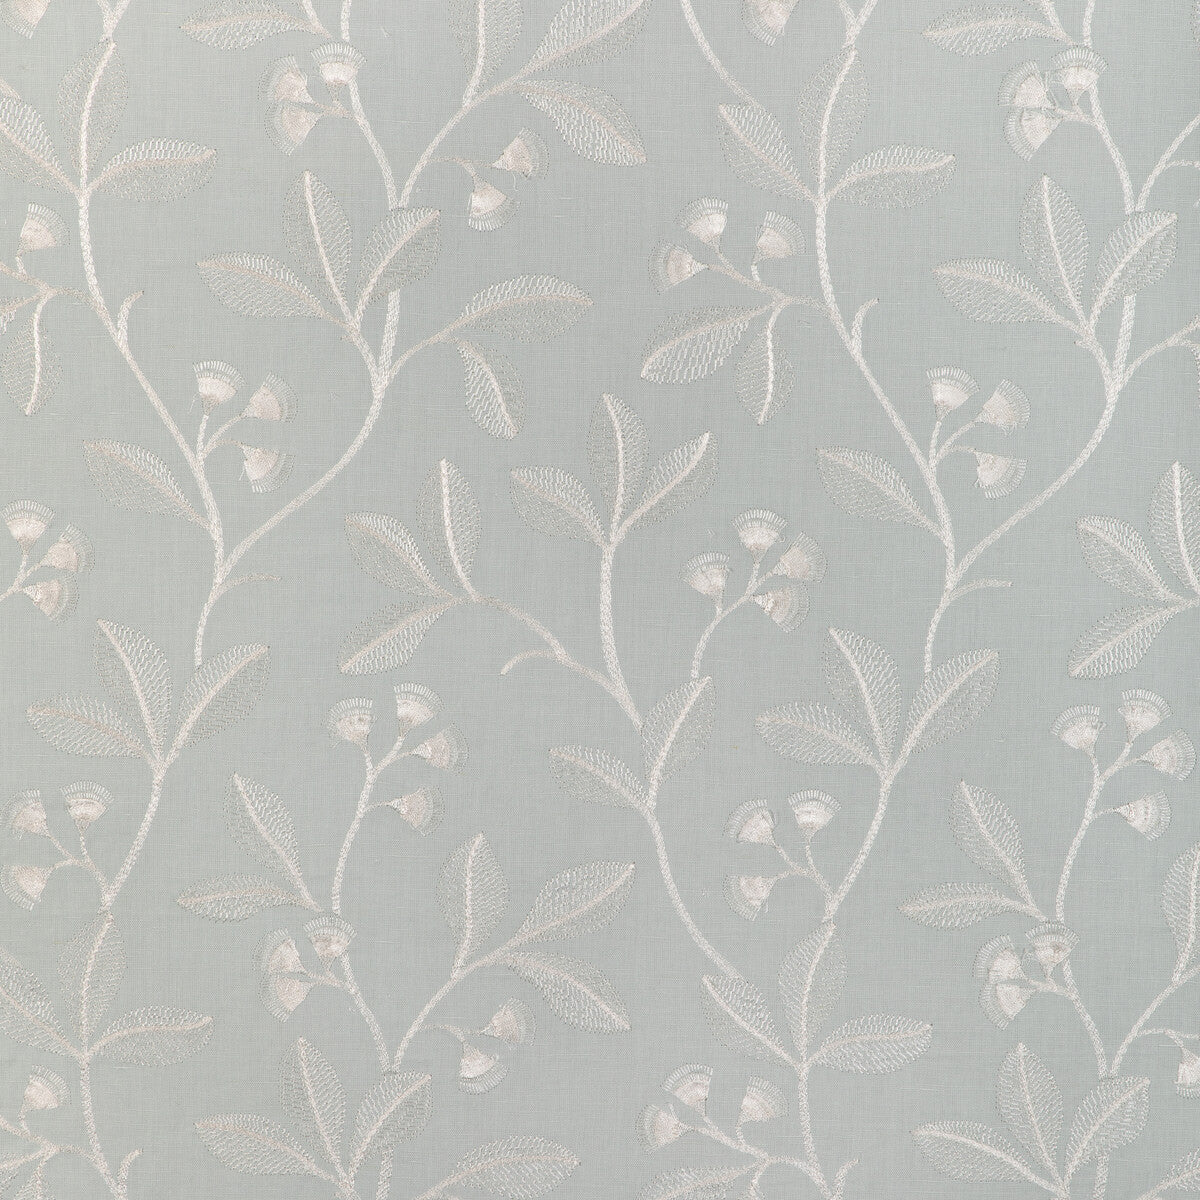 Iris Embroidery fabric in aqua color - pattern 2023144.13.0 - by Lee Jofa in the Garden Walk collection